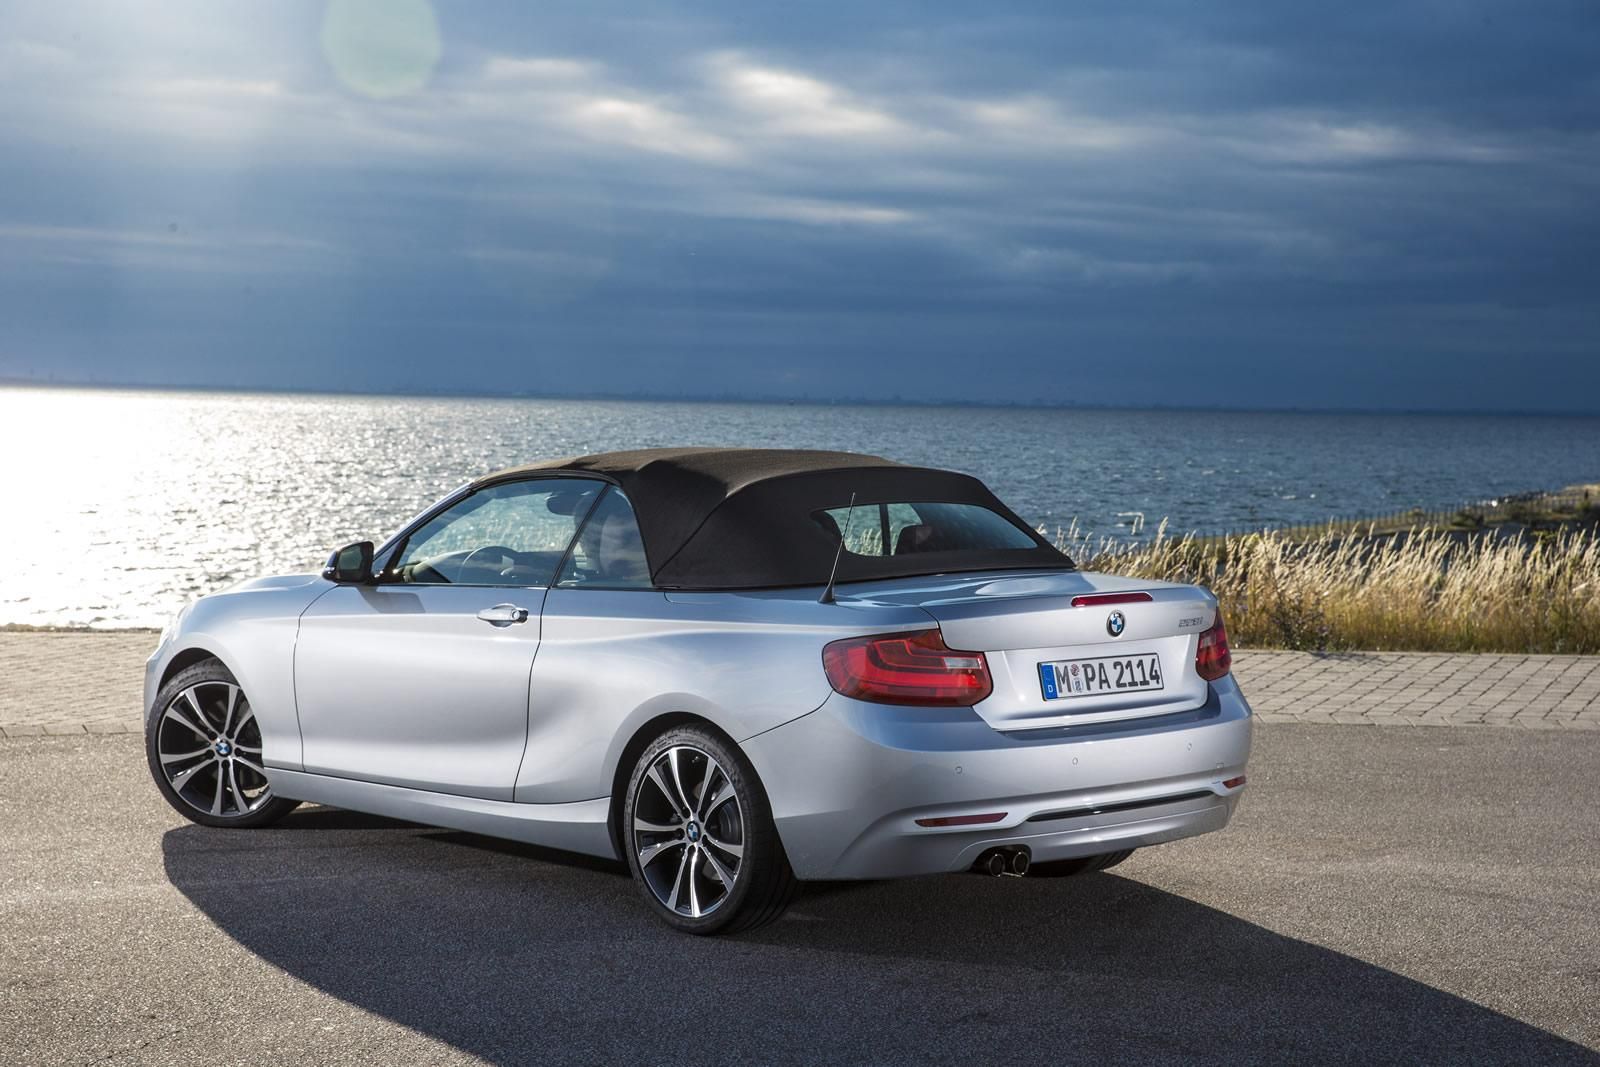 YEN 2015 BMW 2 SERS CONVERTIBLE RESM GALERS